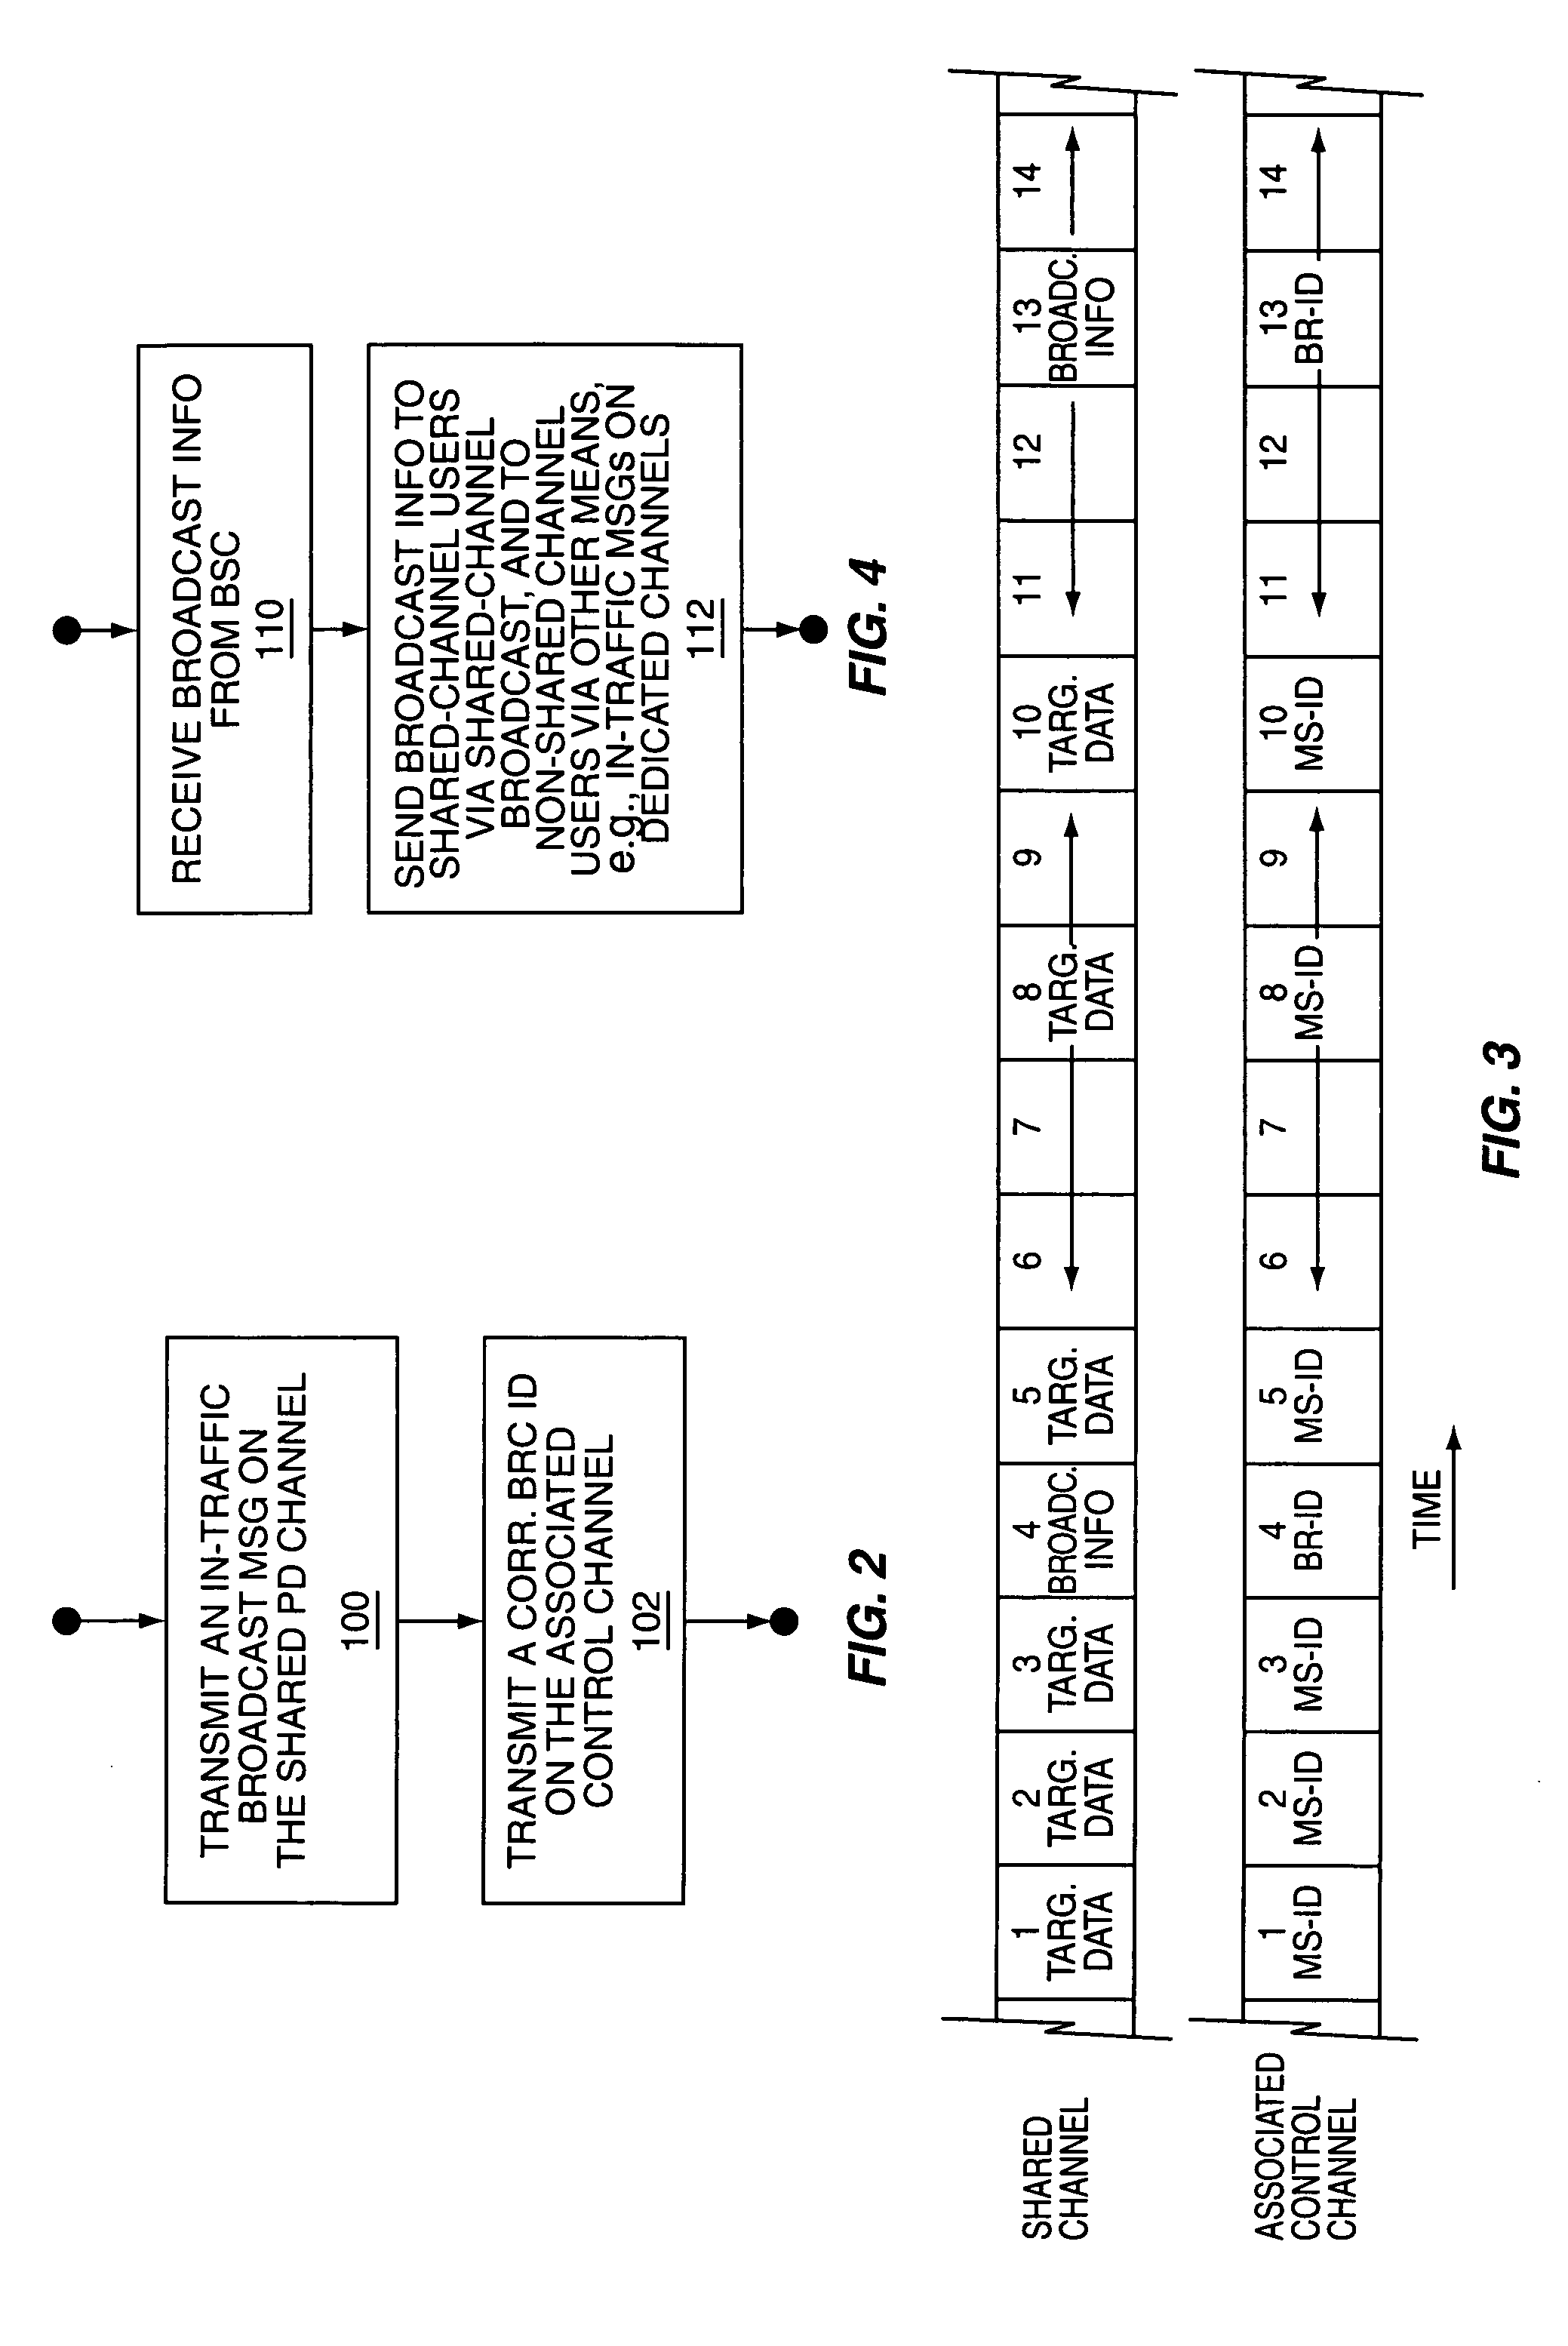 Method and apparatus for broadcasting on a shared packet data channel in a wireless communication network